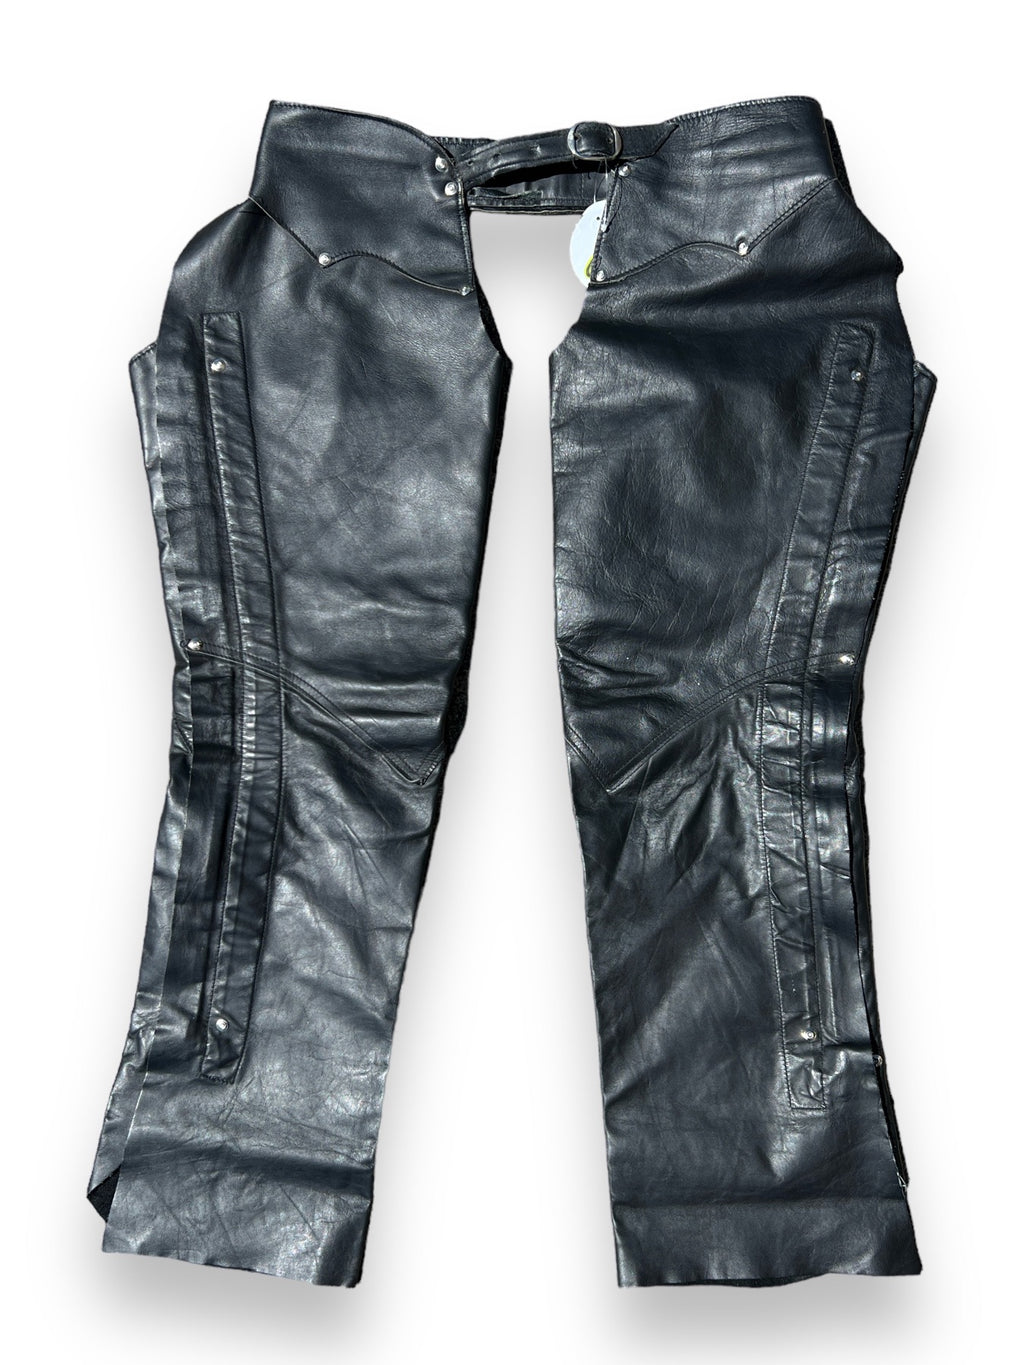 PERFECTO BY SCHOTT BLACK LEATHER CHAPS